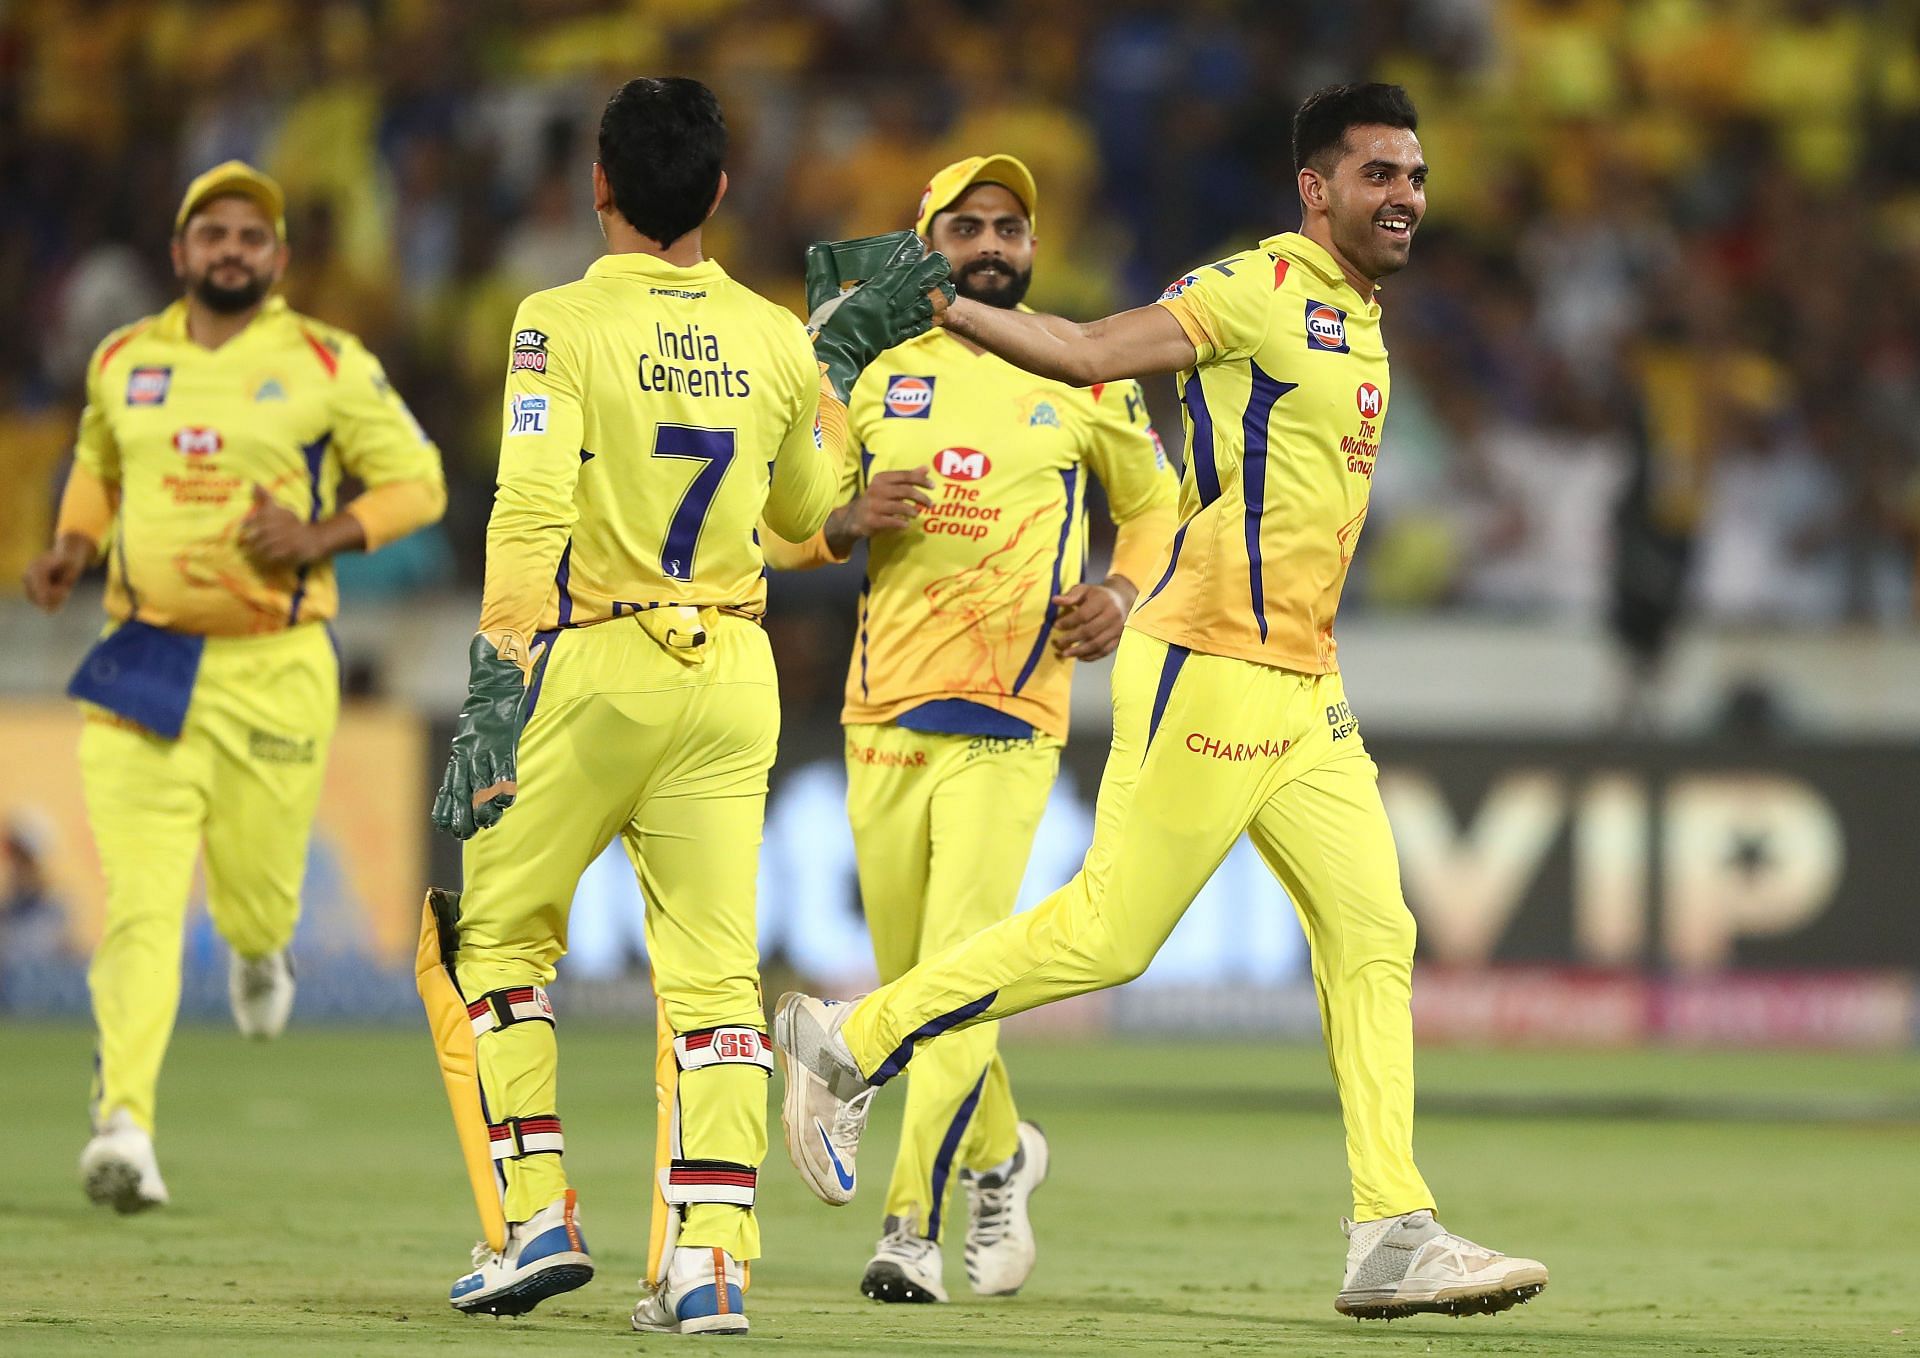  The Chennai Super Kings acquired a full 25-player roster during the IPL 2022 mega auction